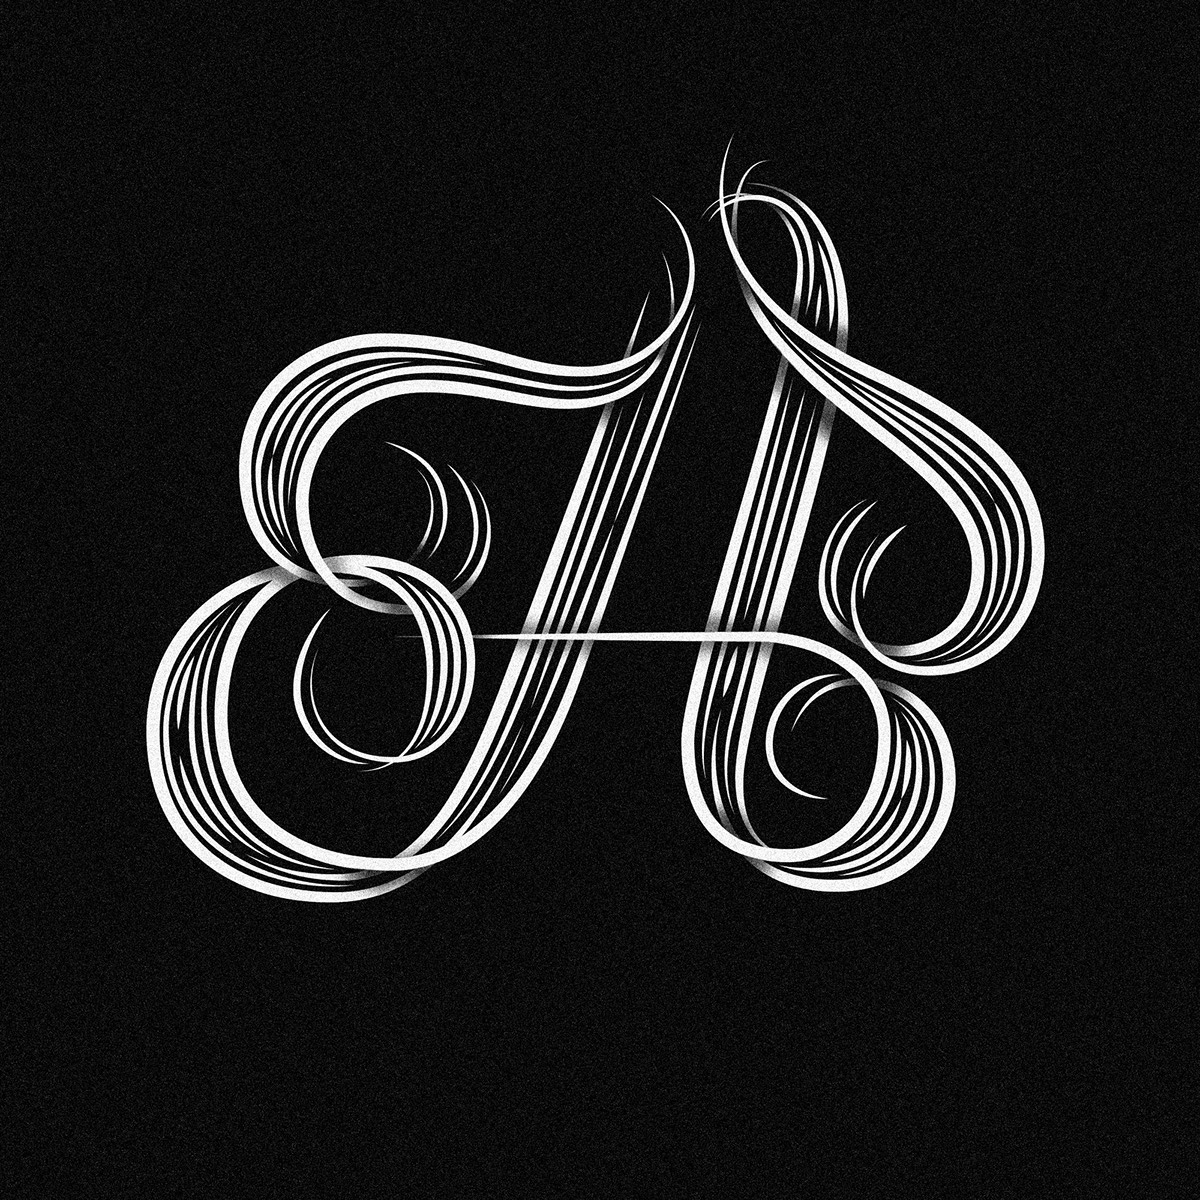 lettering 36daysoftype ArtDirection letters type graphic design